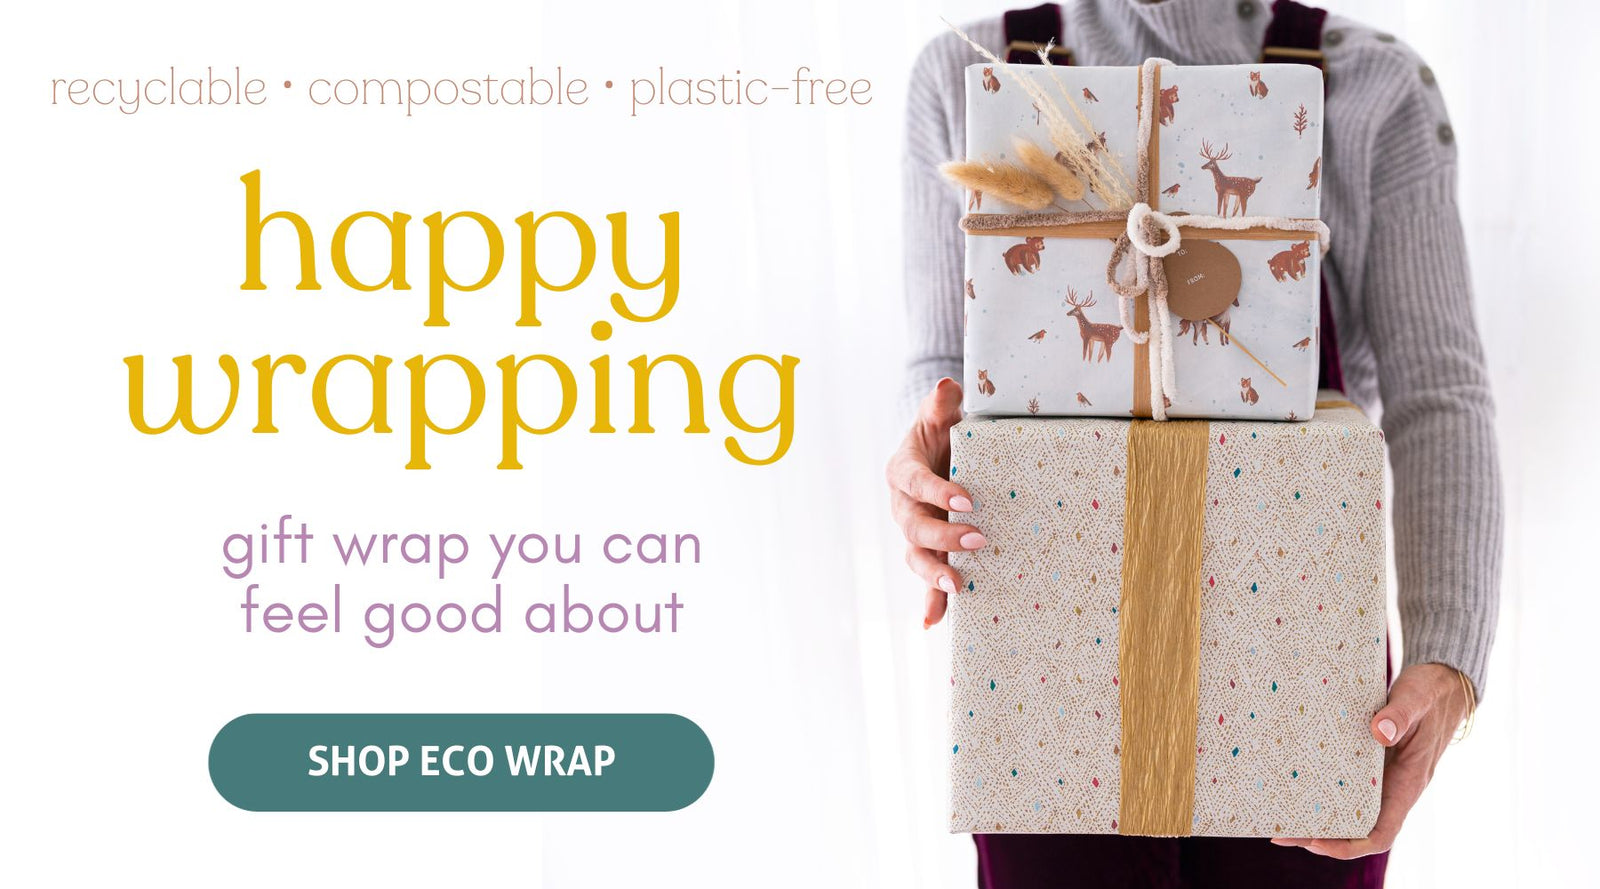 Newspaper Gift Wrap - Eco-Friendly Recyclable Compostable Wrapping Paper on  Recyclable Newsprint using Soy Inks - 3 large 2-sided sheets with 3 hang